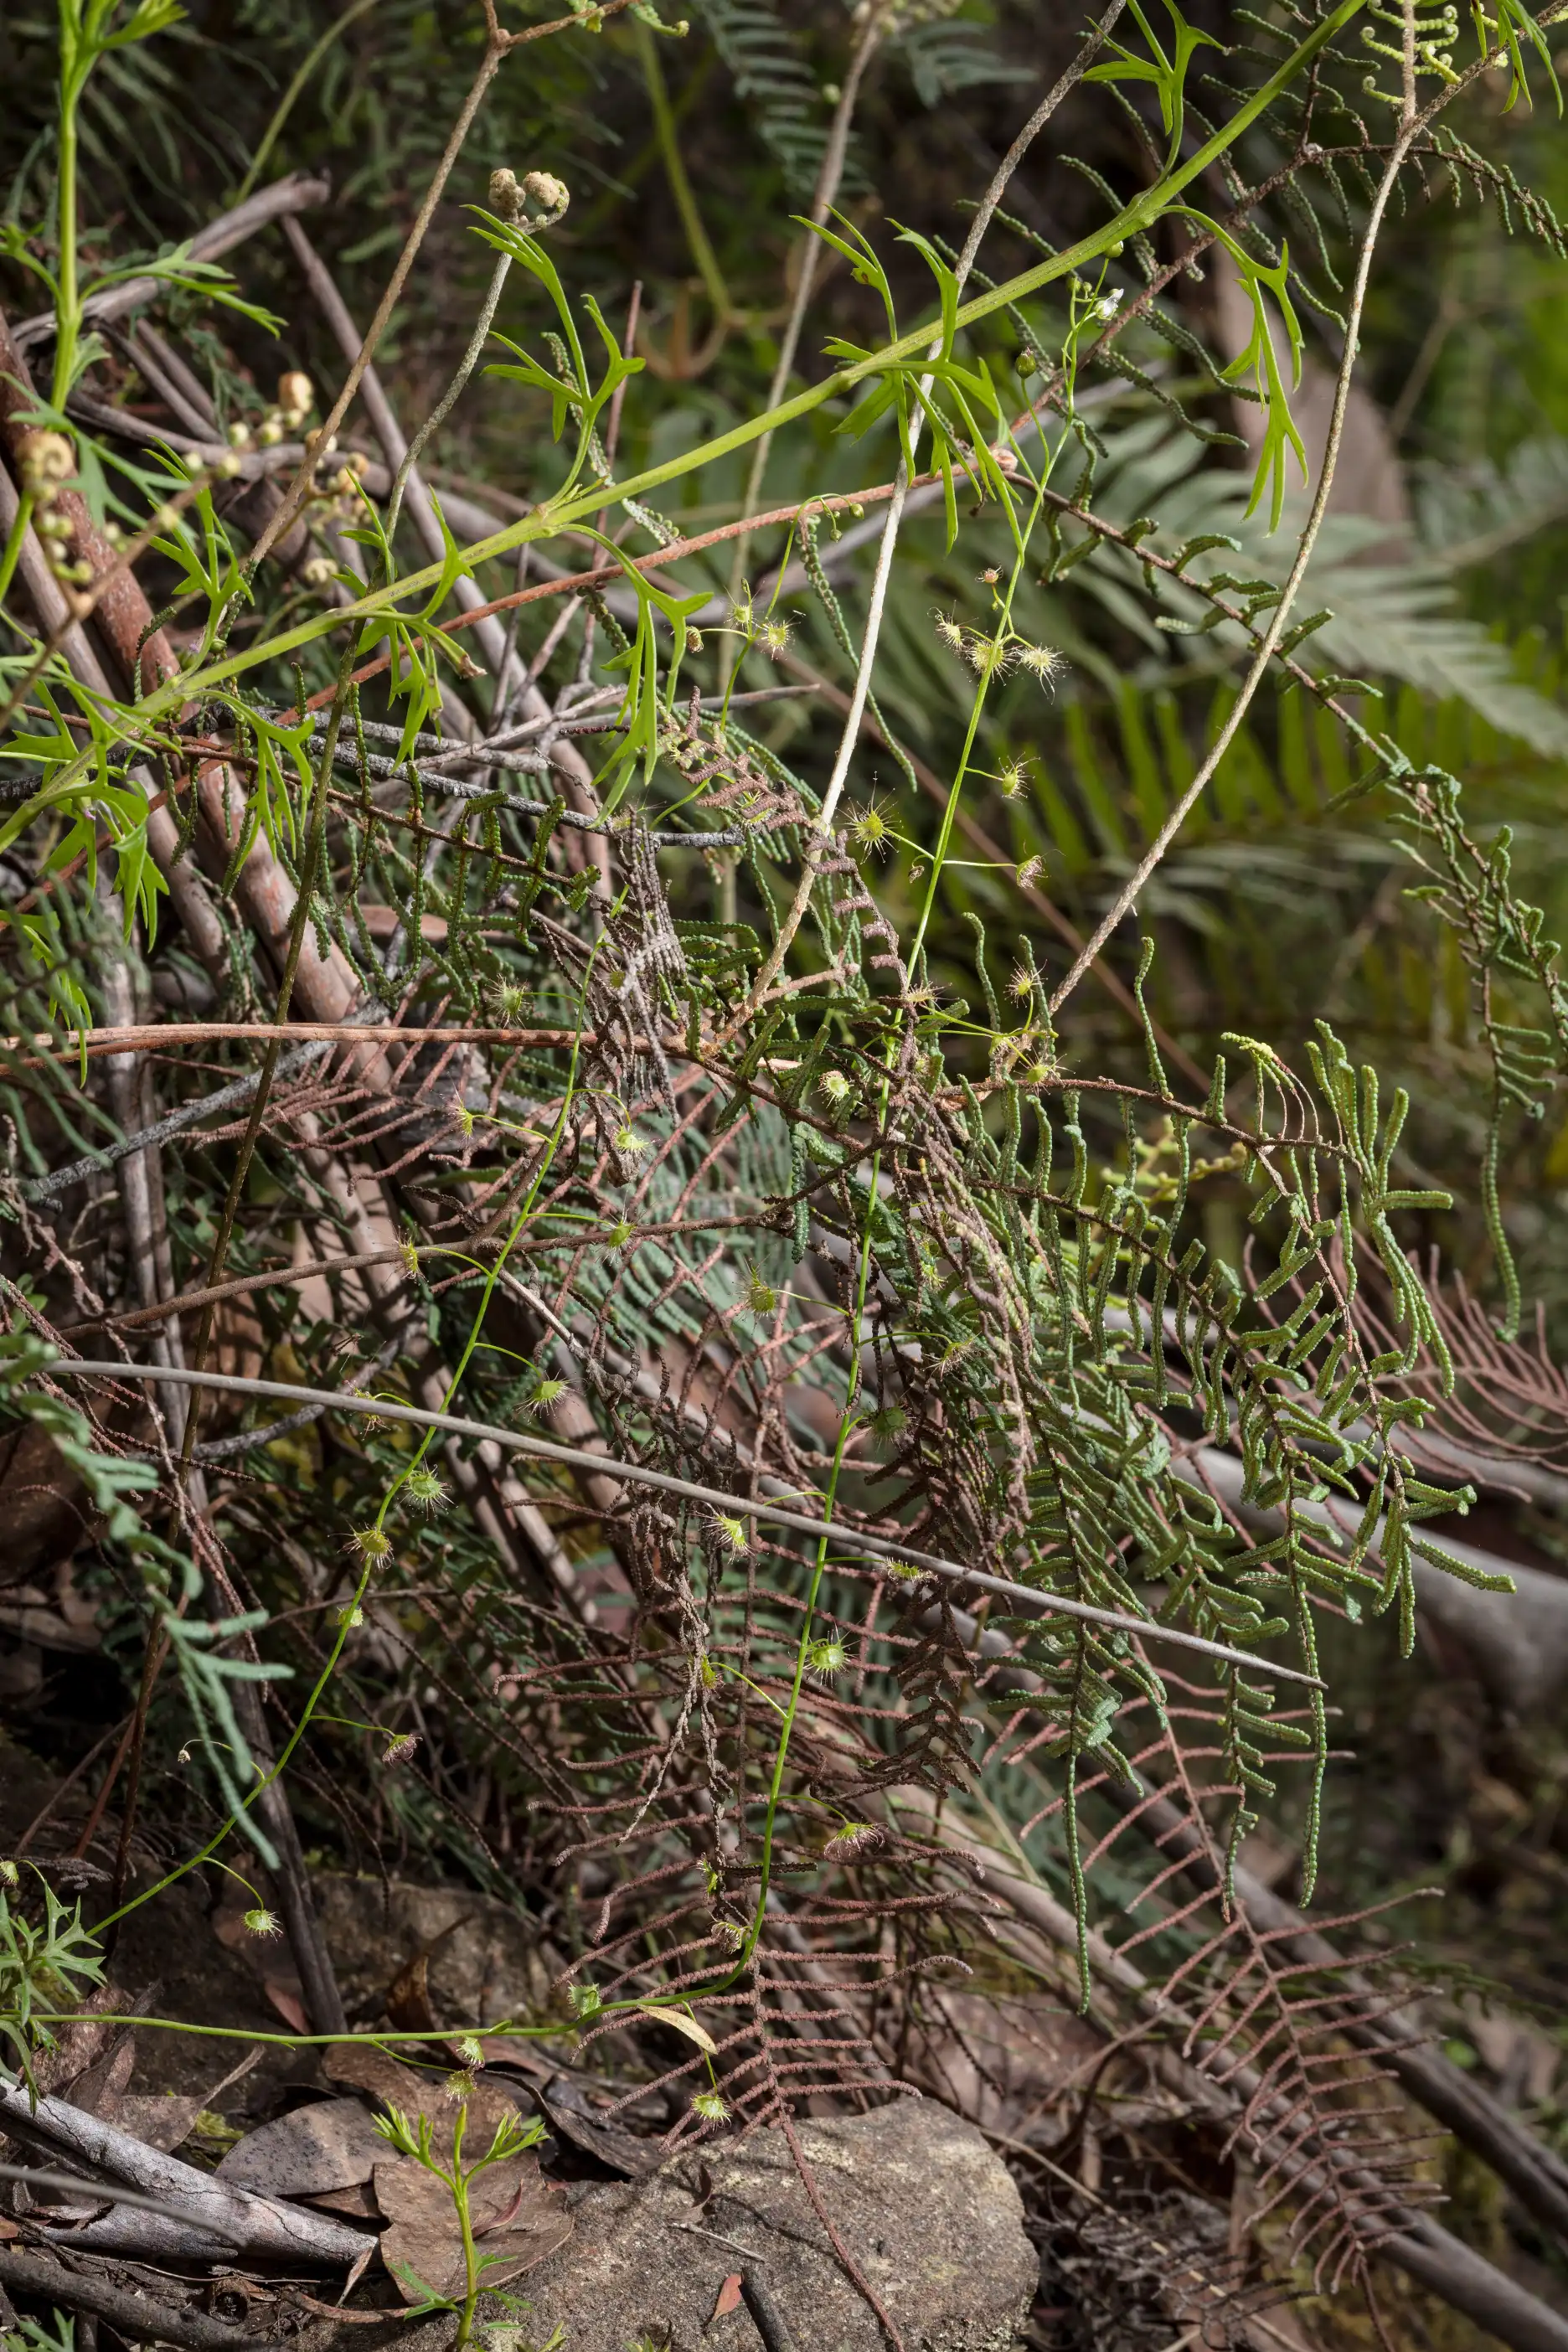 Drosera auriculata plant with other trail-side foliage